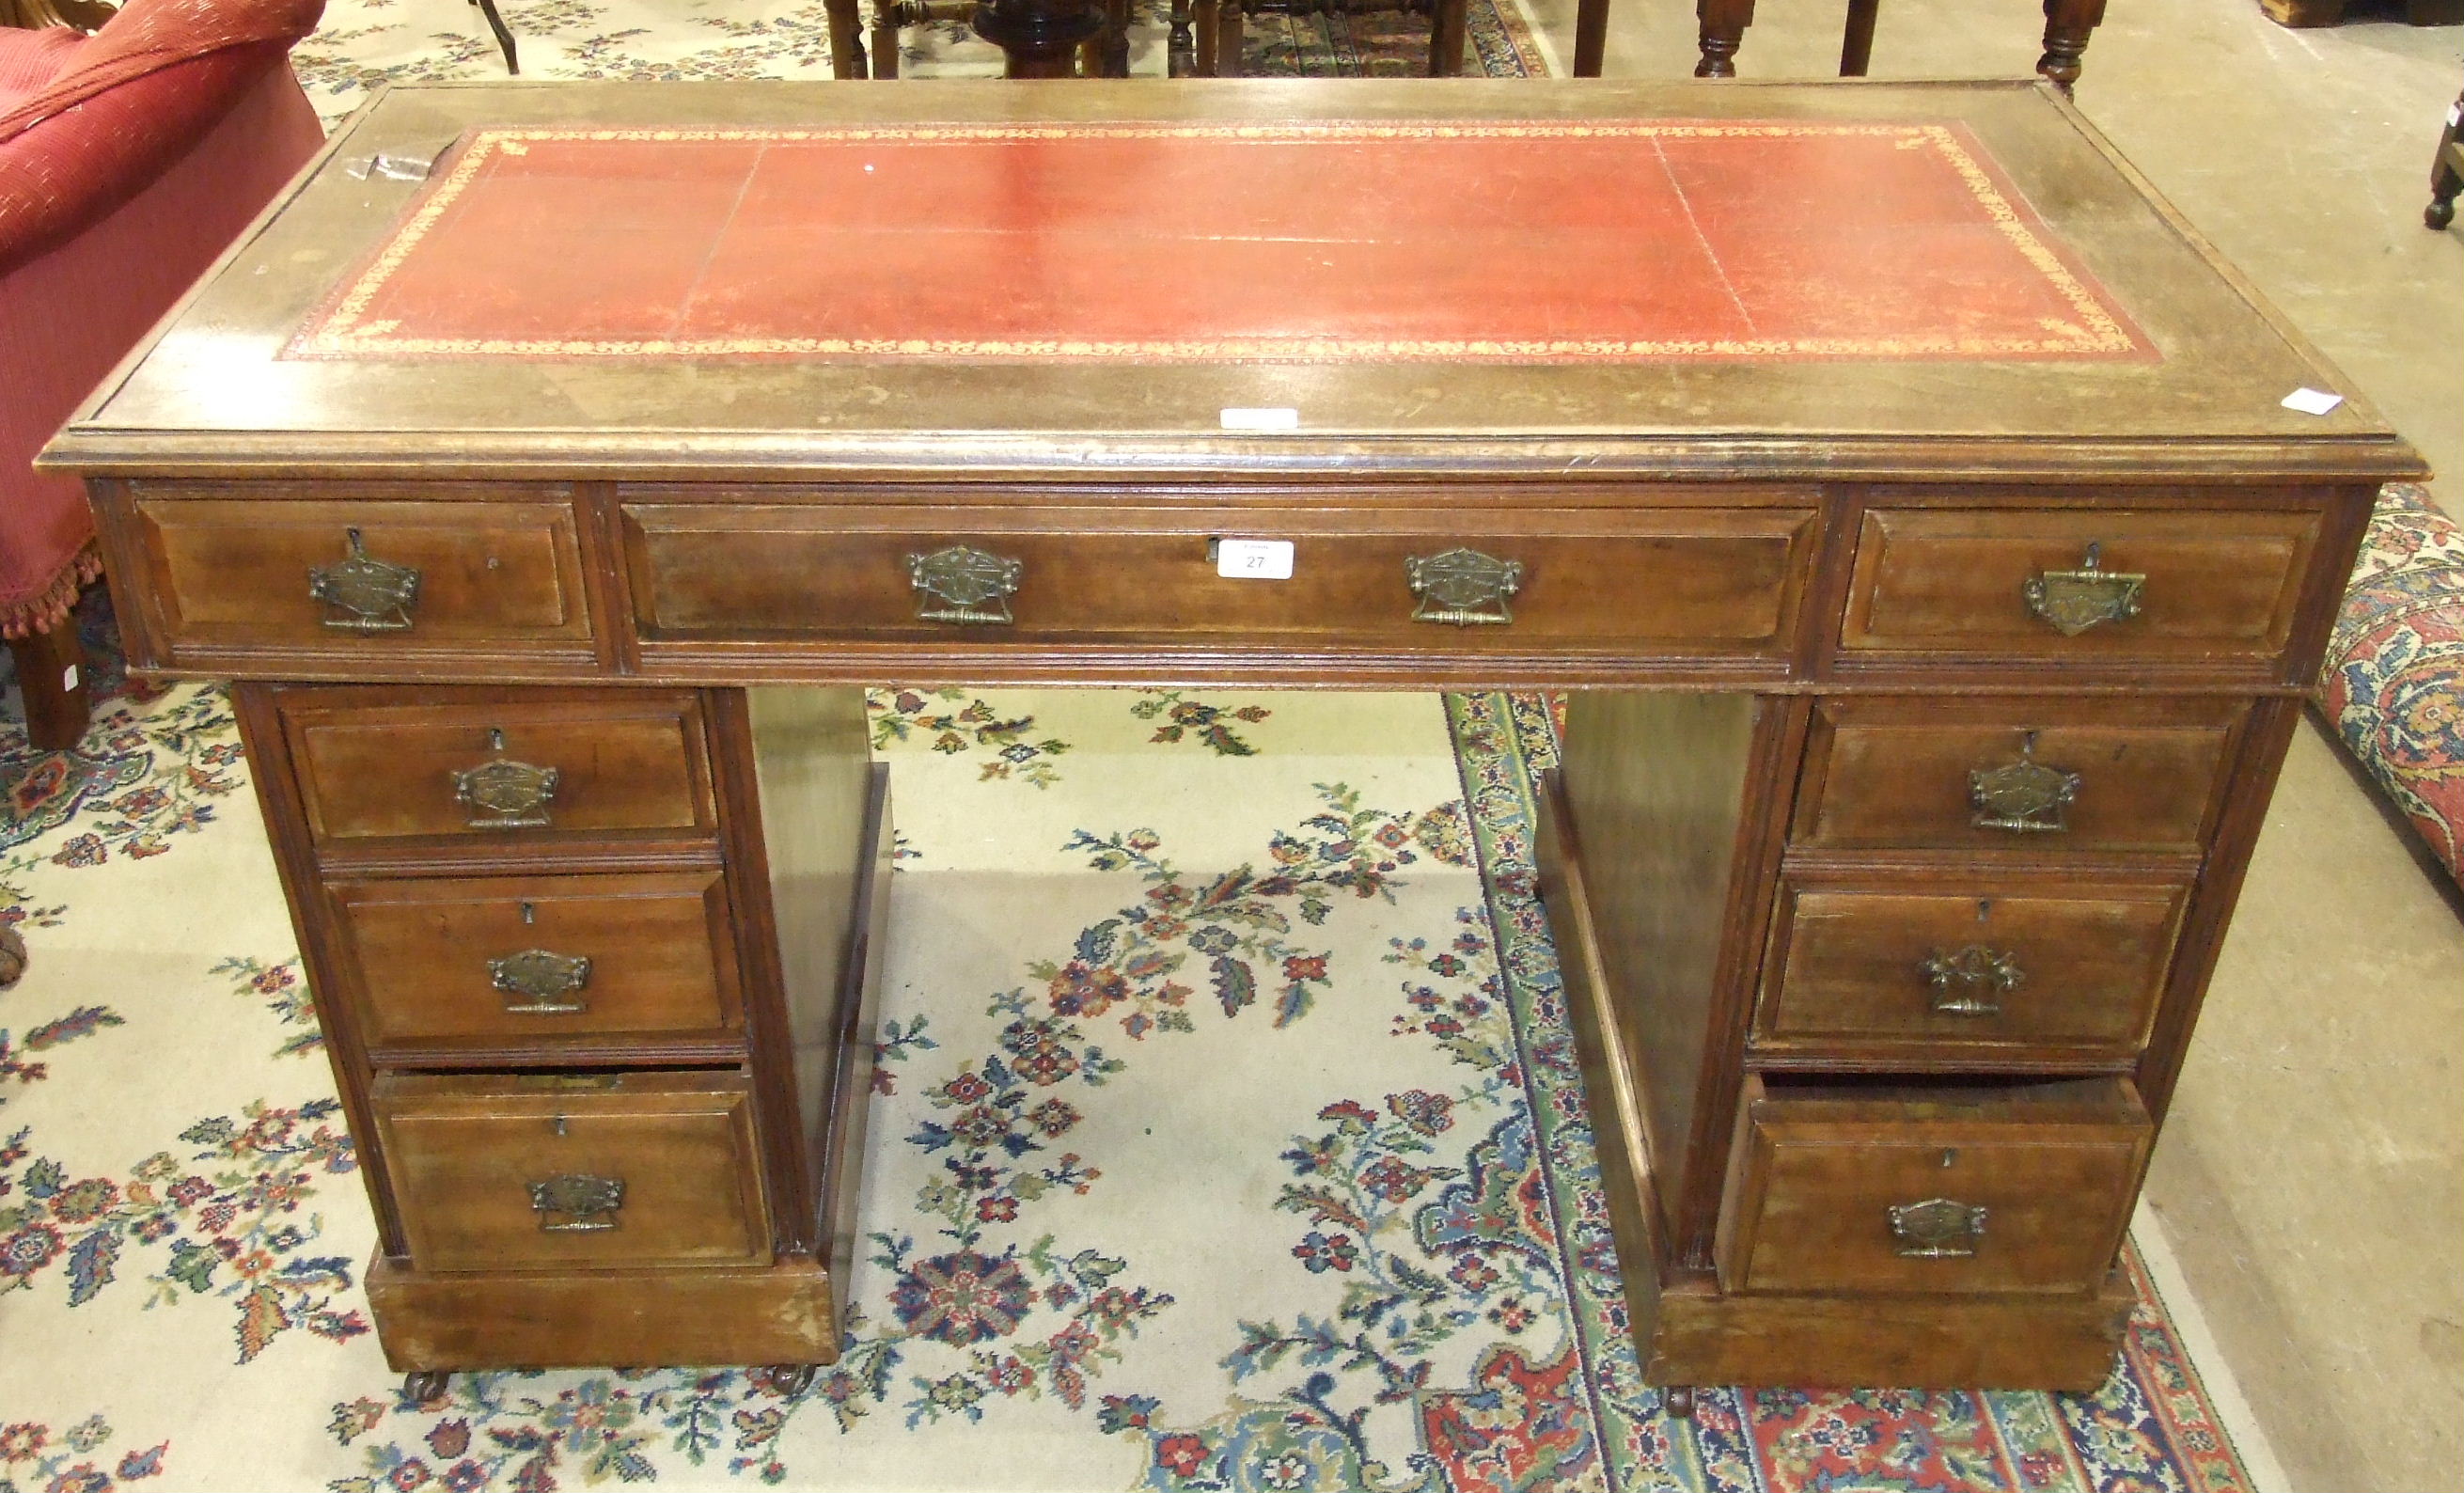 An Edwardian stained wood knee-hole desk, the rectangular top with writing inset above three